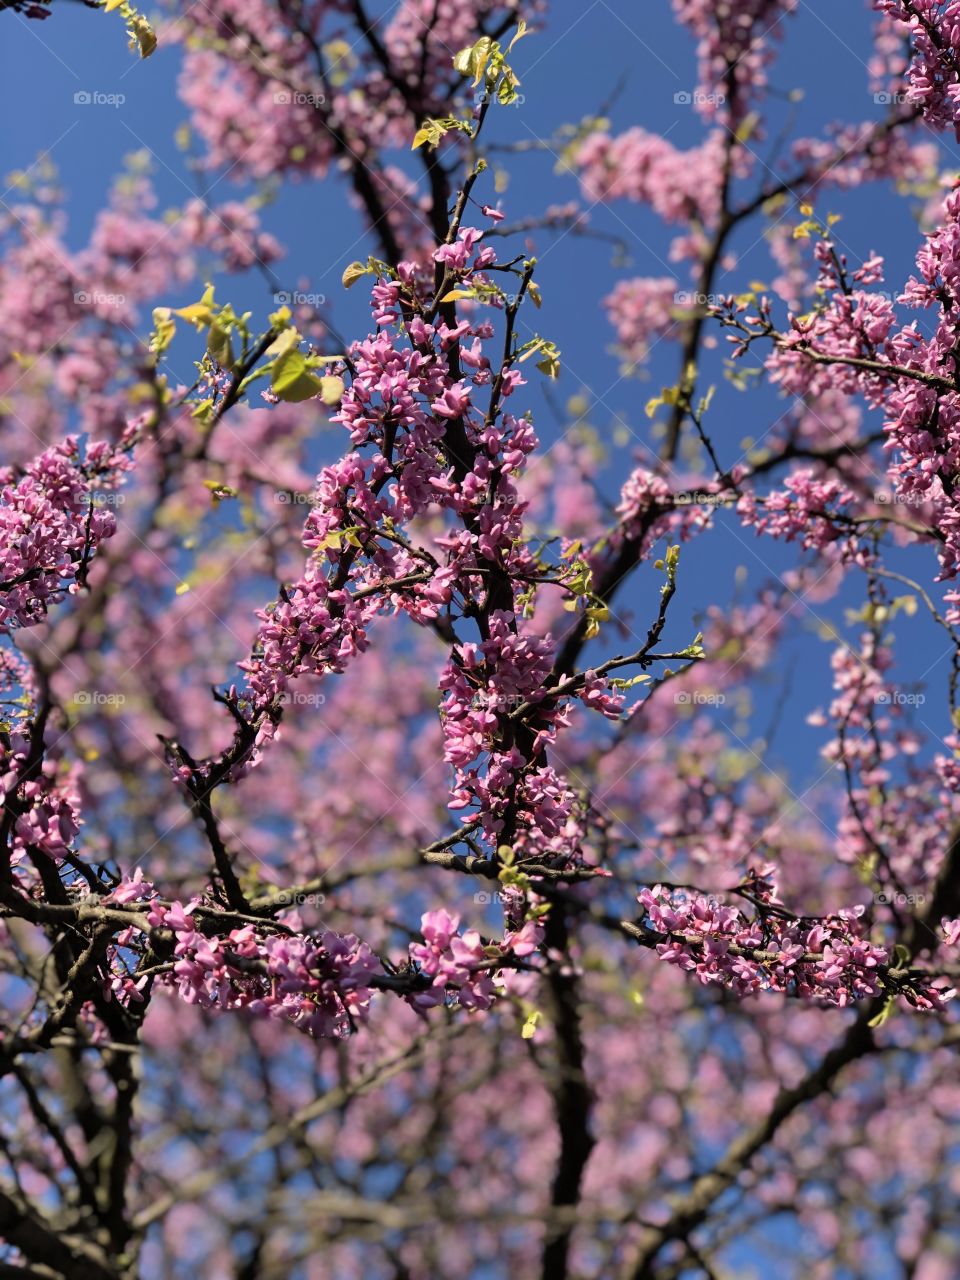 May blossoms in spring